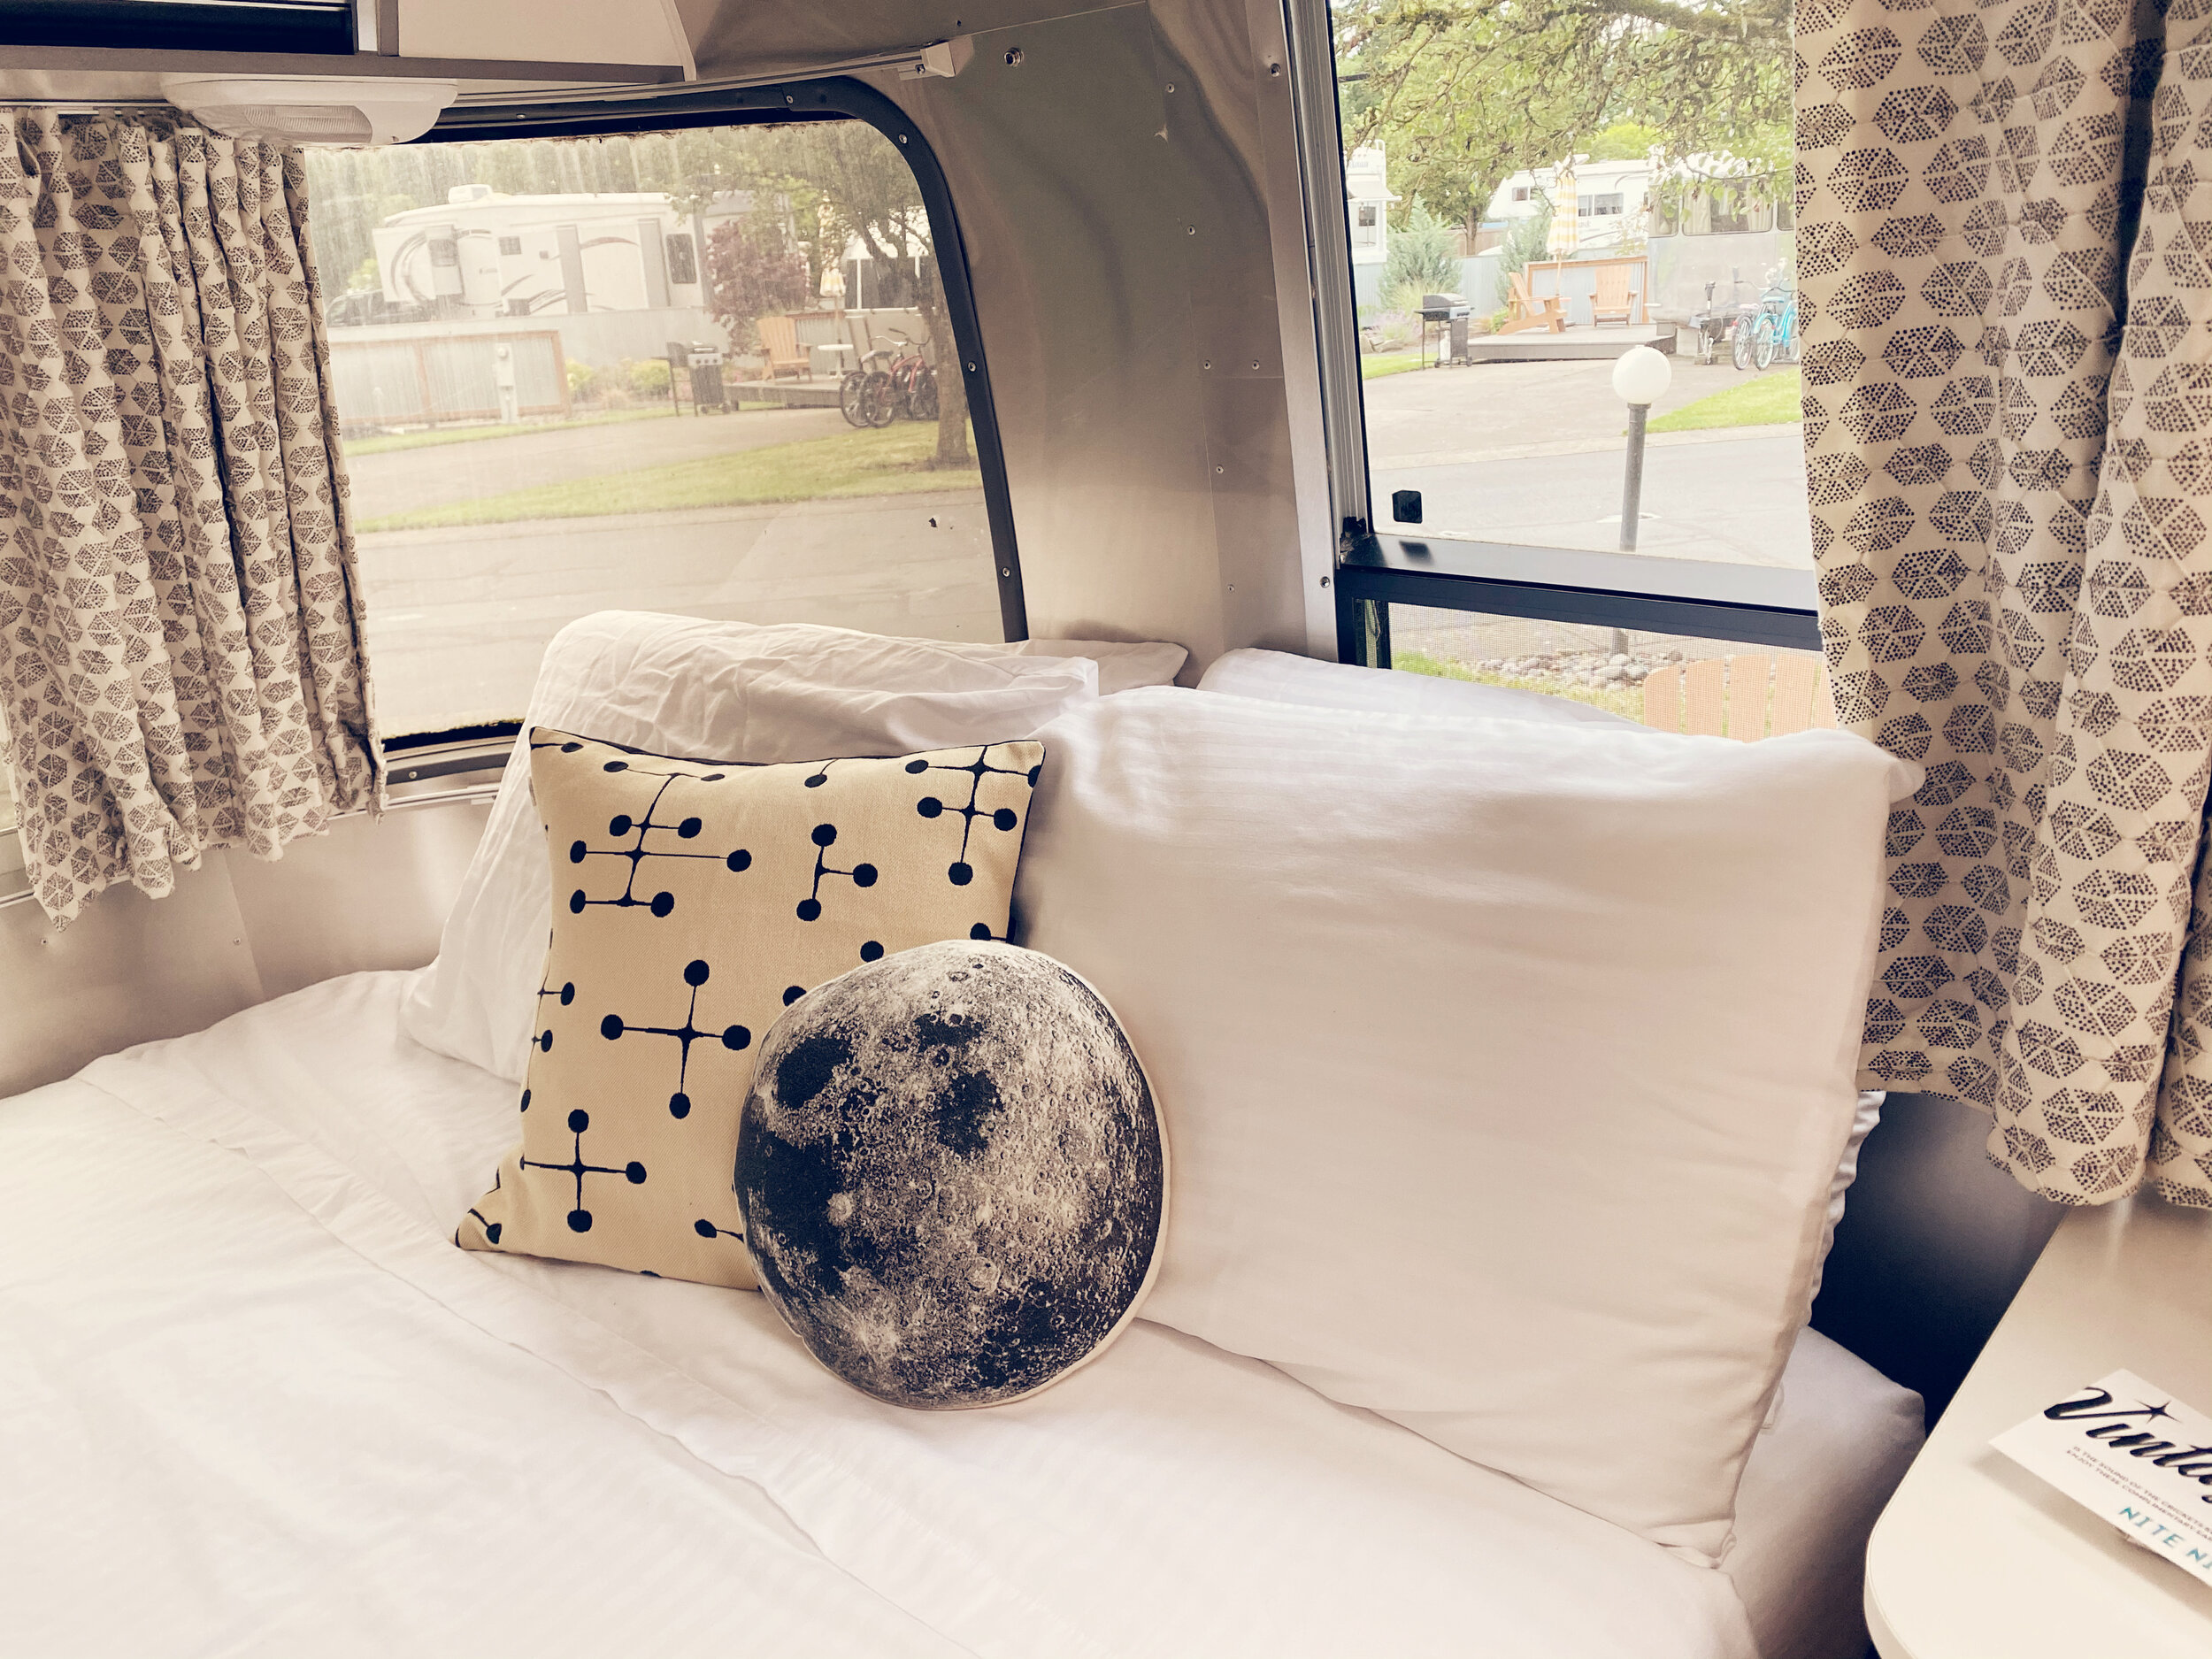 Interior of the Airstream Bambi at the Vintages Trailer Resort 